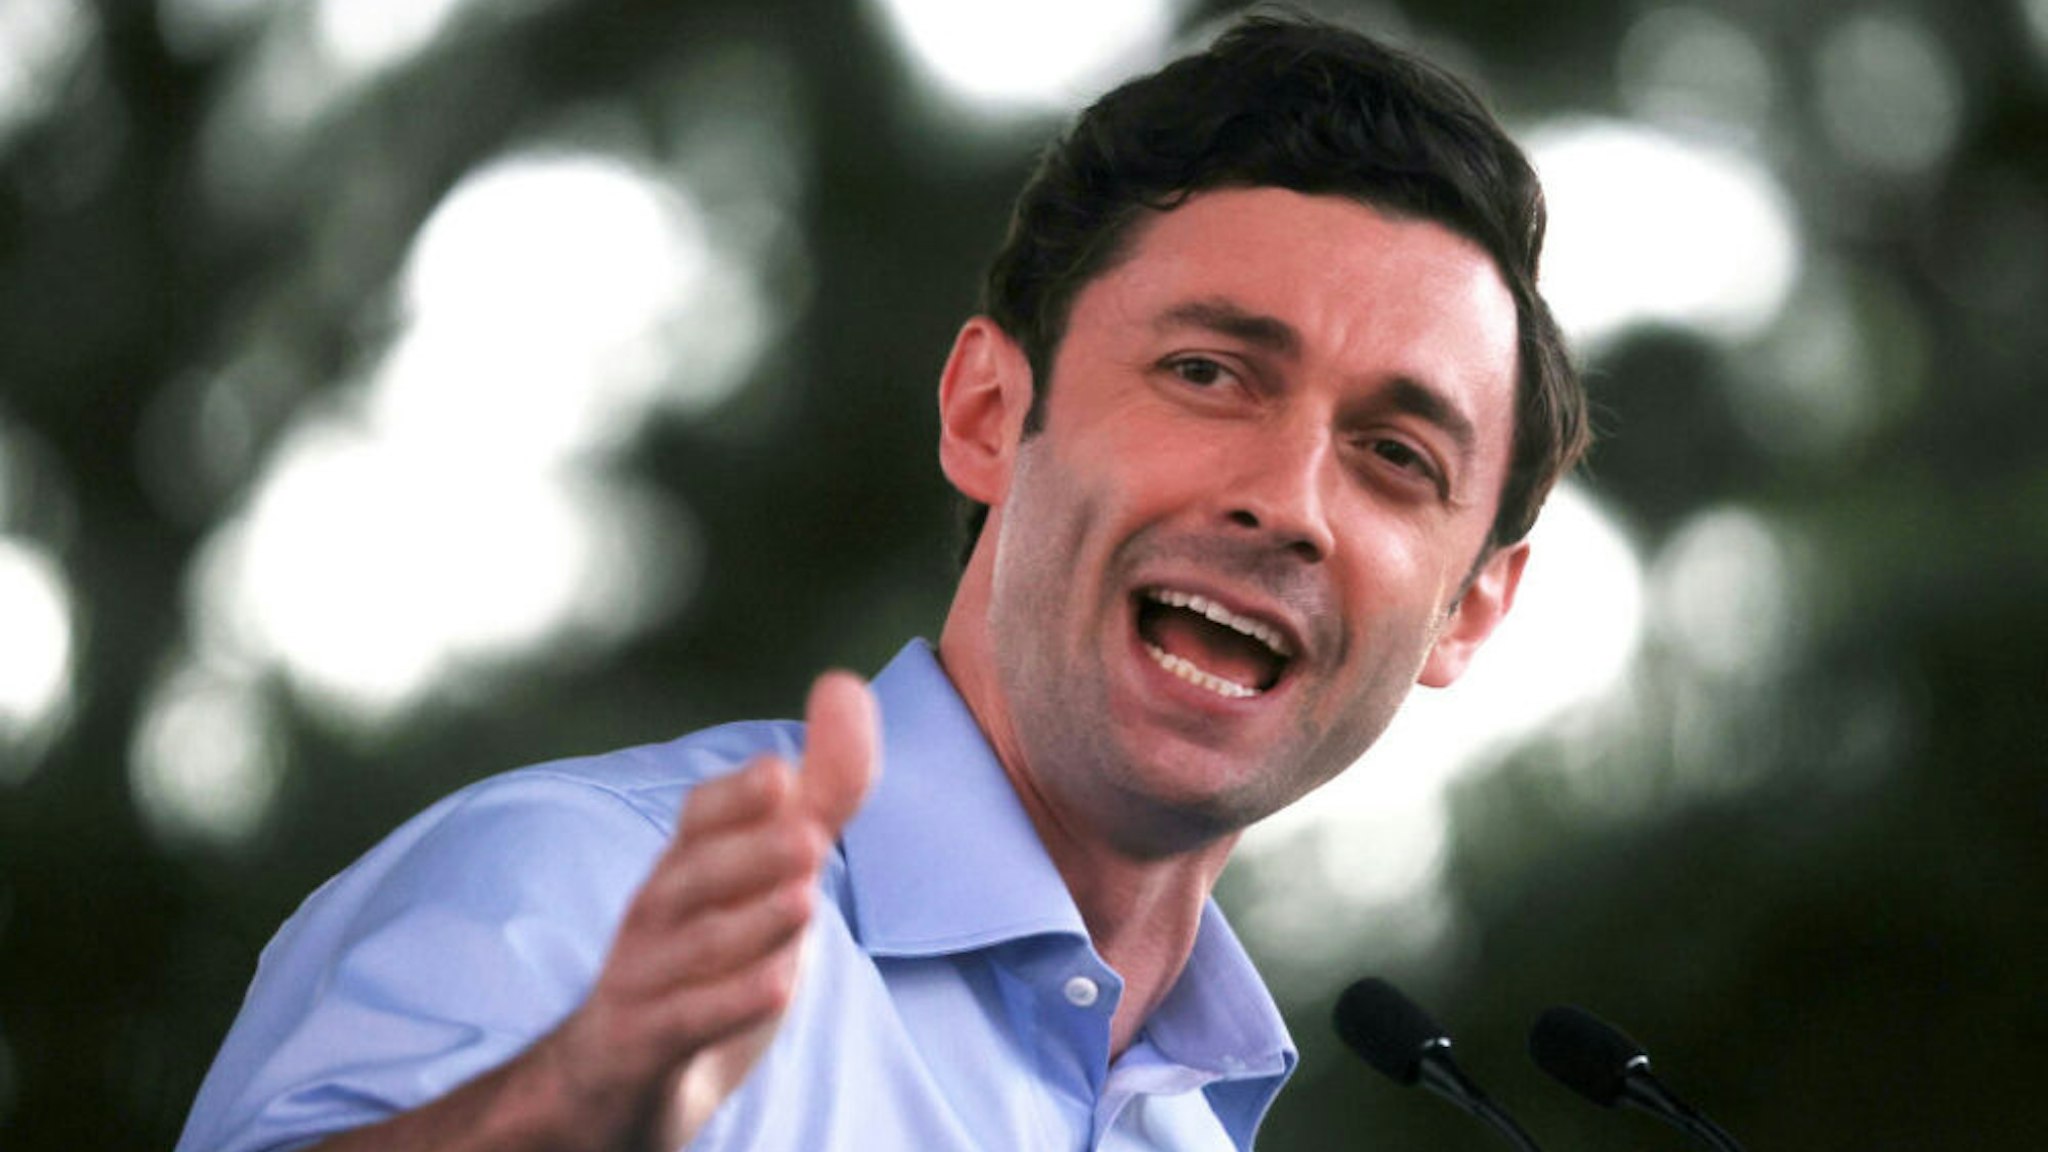 COLUMBUS, GEORGIA - OCTOBER 29: Democratic U.S. Senate candidate Jon Ossoff speaks during a "Get Out the Early Vote" drive-in campaign event on October 29, 2020 in Columbus, Georgia. With less than a week to go until Election Day, Democratic candidates for the U.S. Senate in Georgia are continuing to campaign throughout the state.